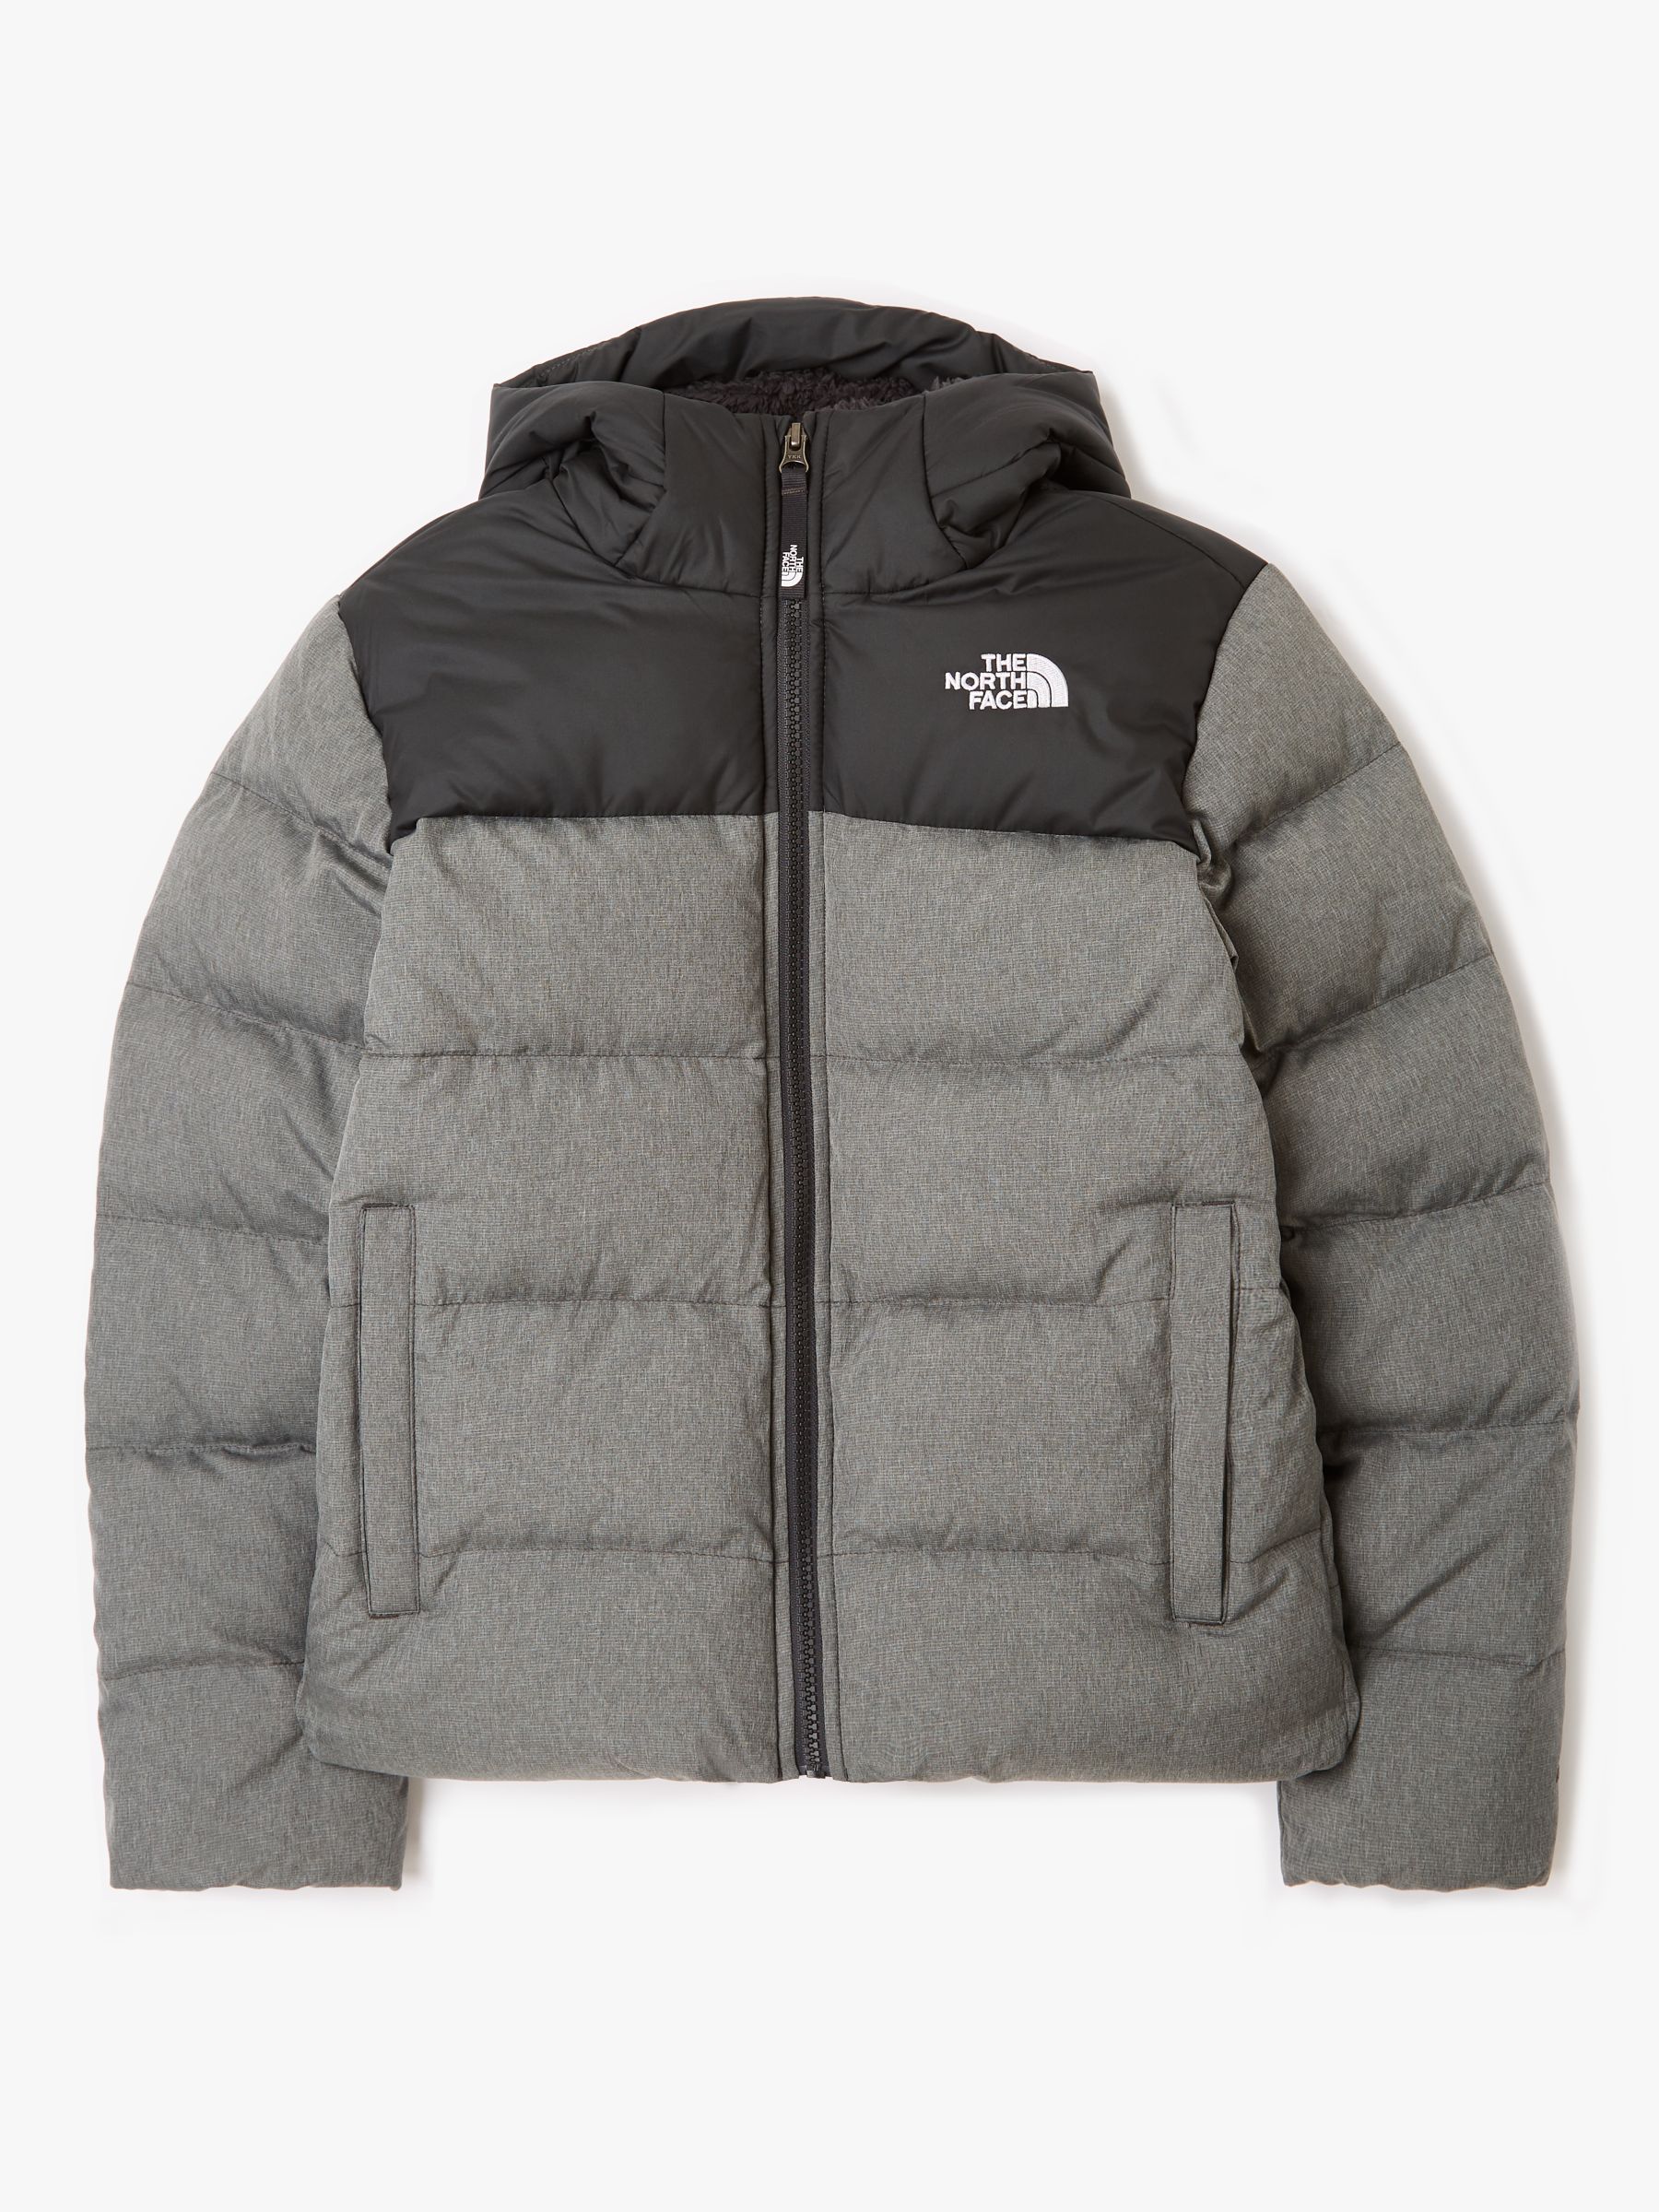 the north face childrens jacket 